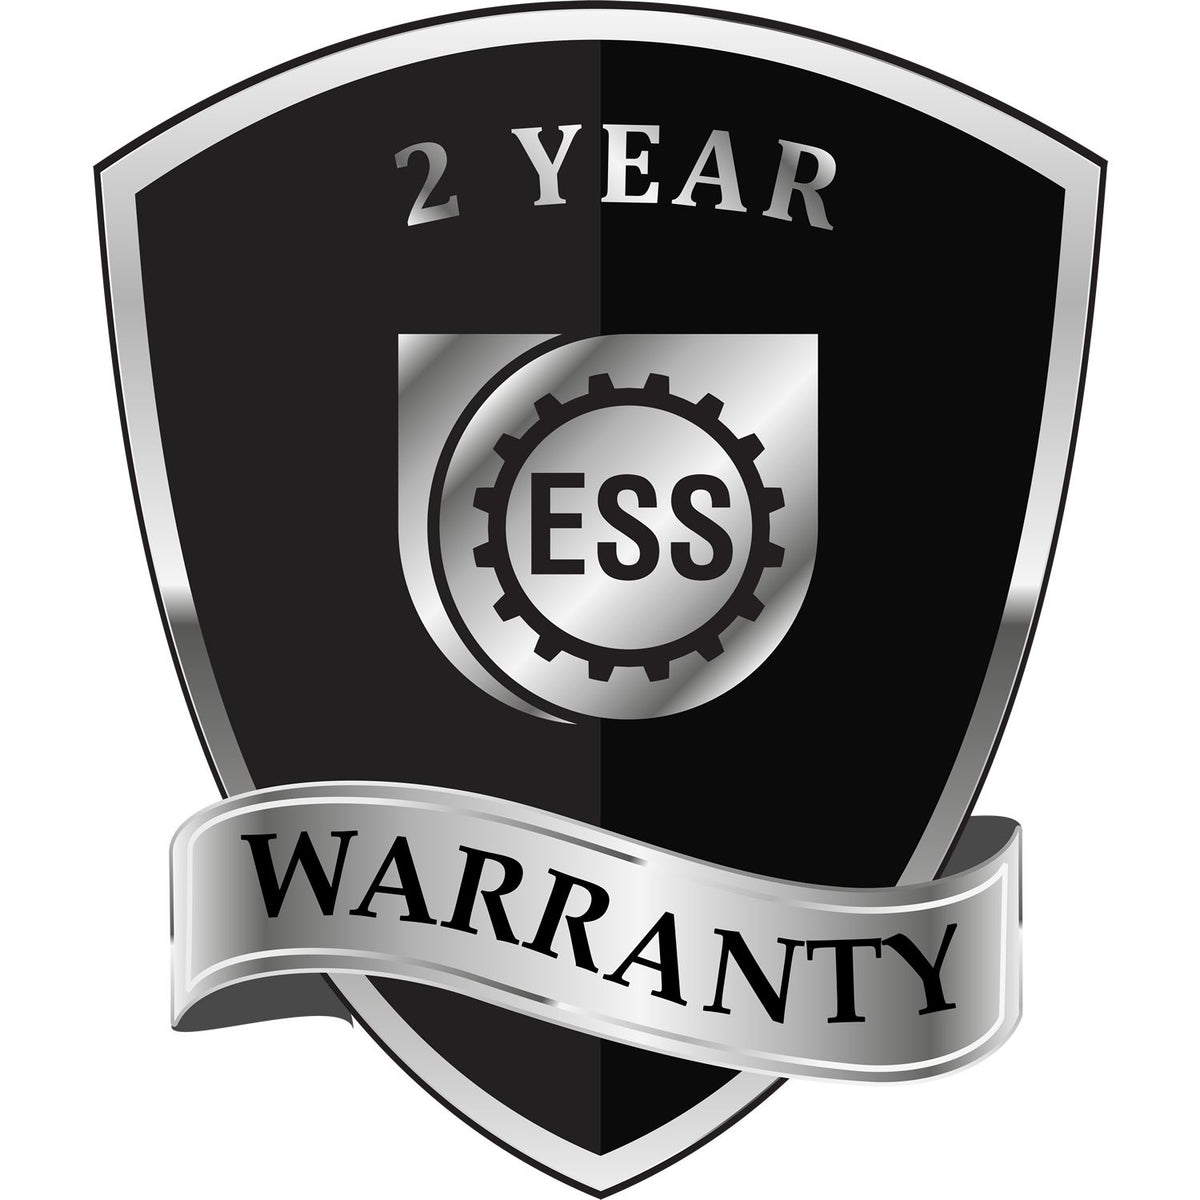 A badge or emblem showing a warranty icon for the Handheld Missouri Professional Engineer Embosser